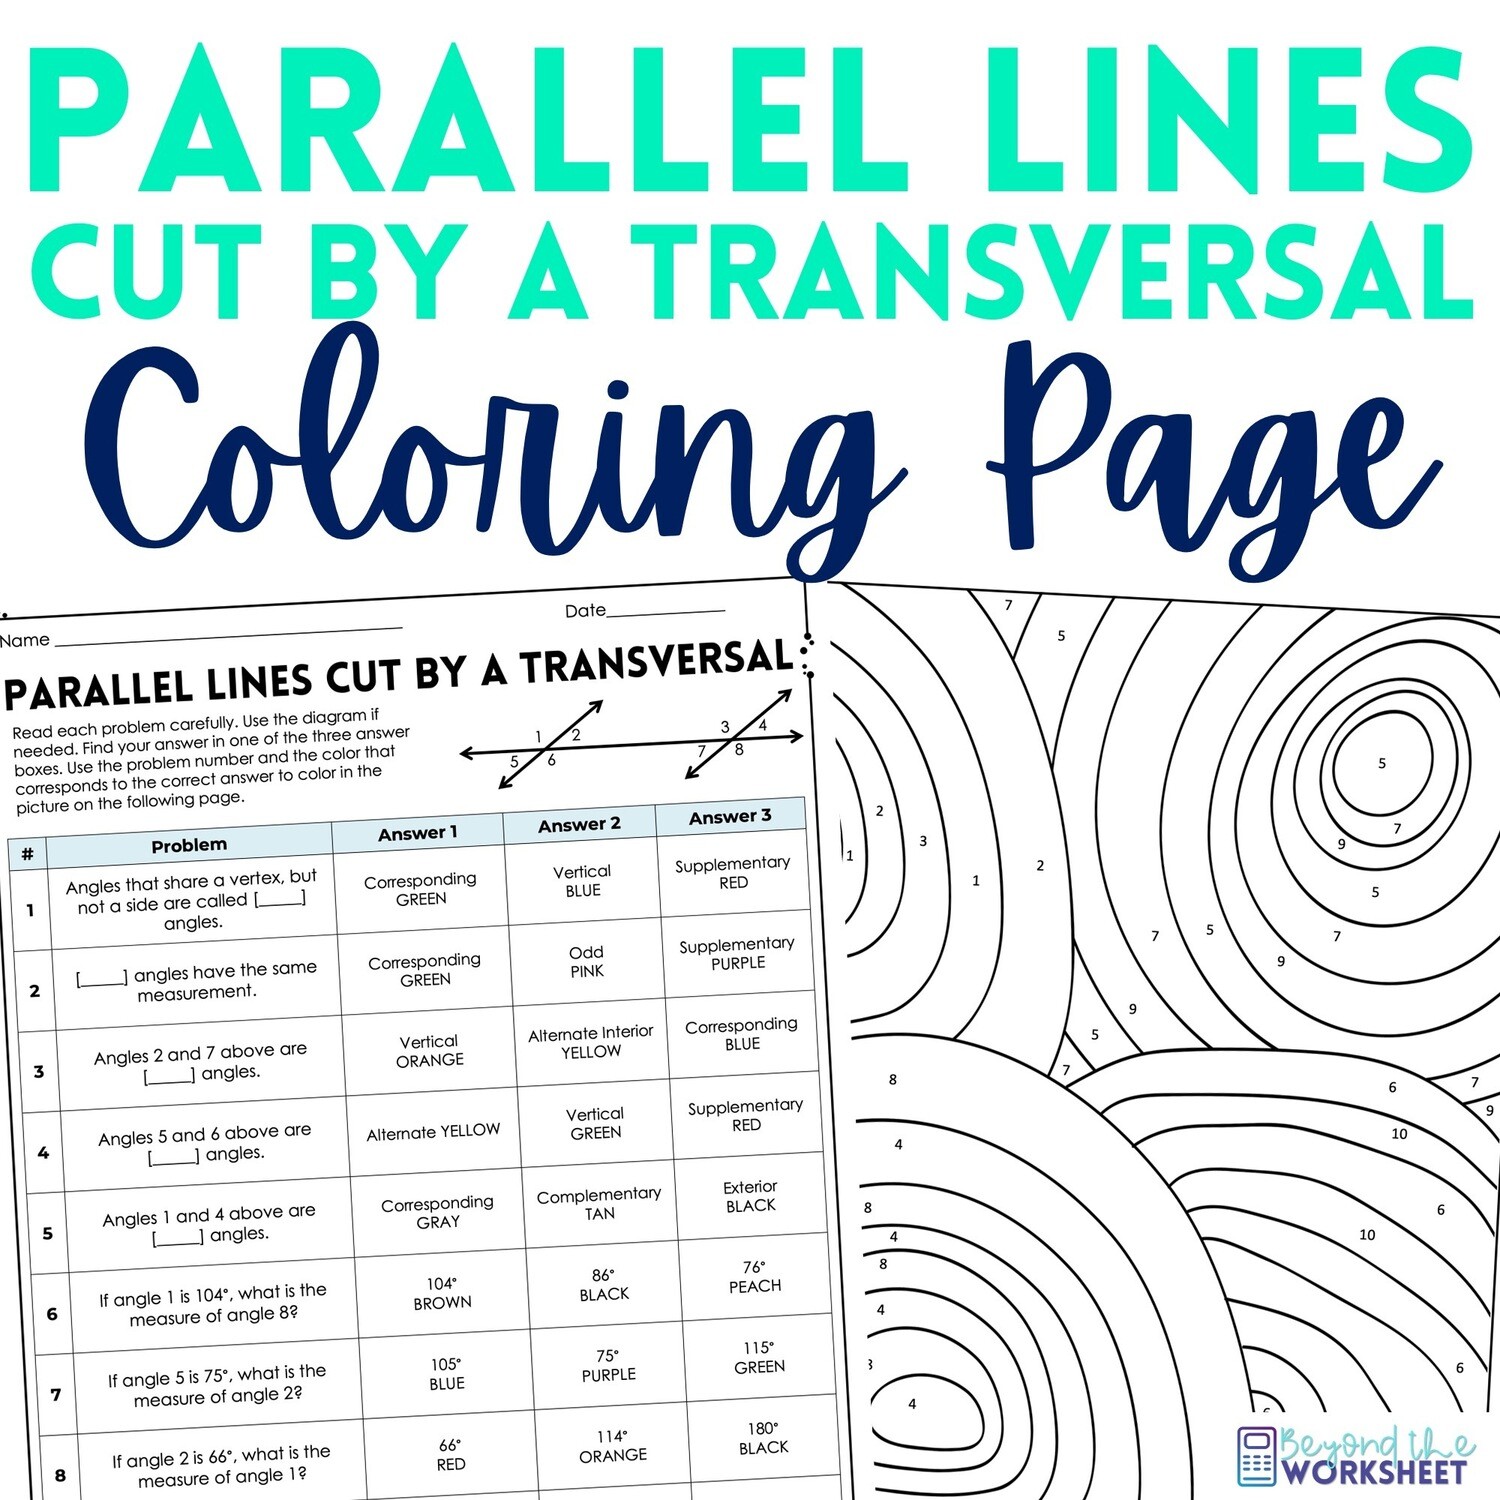 Parallel Lines Cut by a Transversal Coloring Worksheet